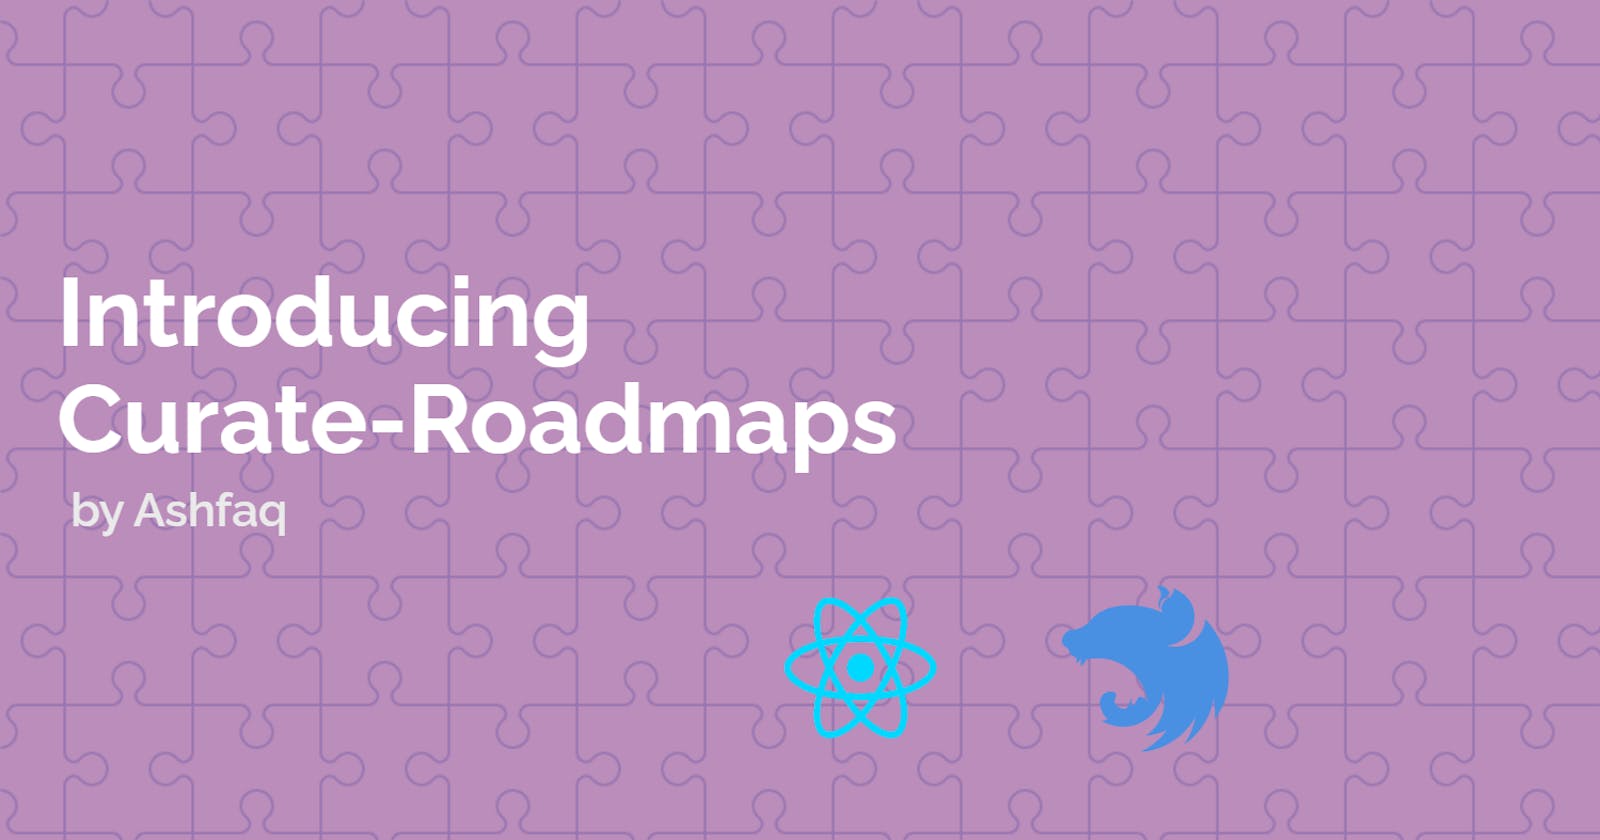 Launching Curate-Roadmaps! An open source initiative to curate useful resources